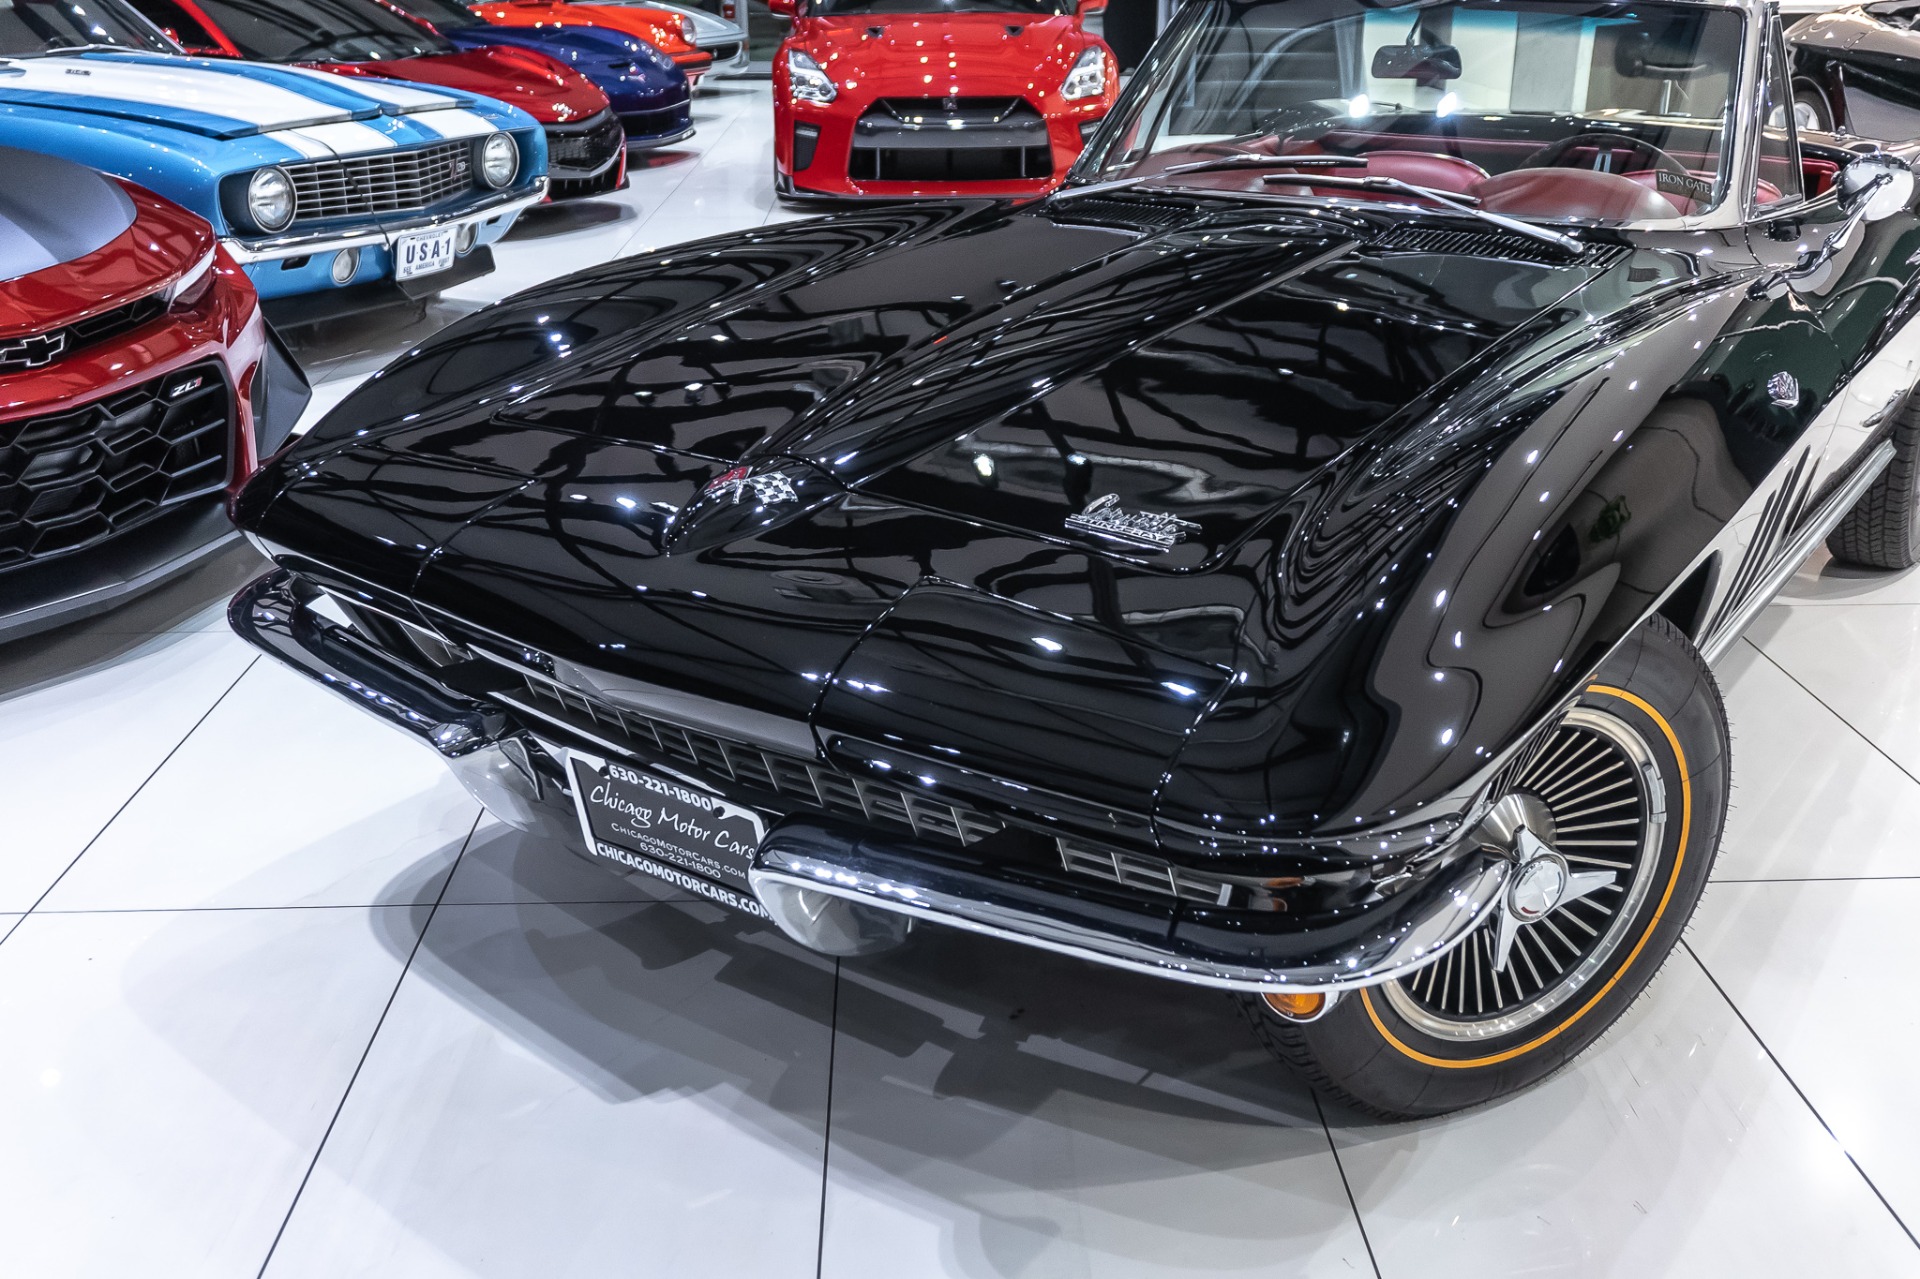 Used-1966-Chevrolet-Corvette-Stingray-Convertible-Numbers-Matching-327ci-4-Speed-Restored-Former-NHL-Players